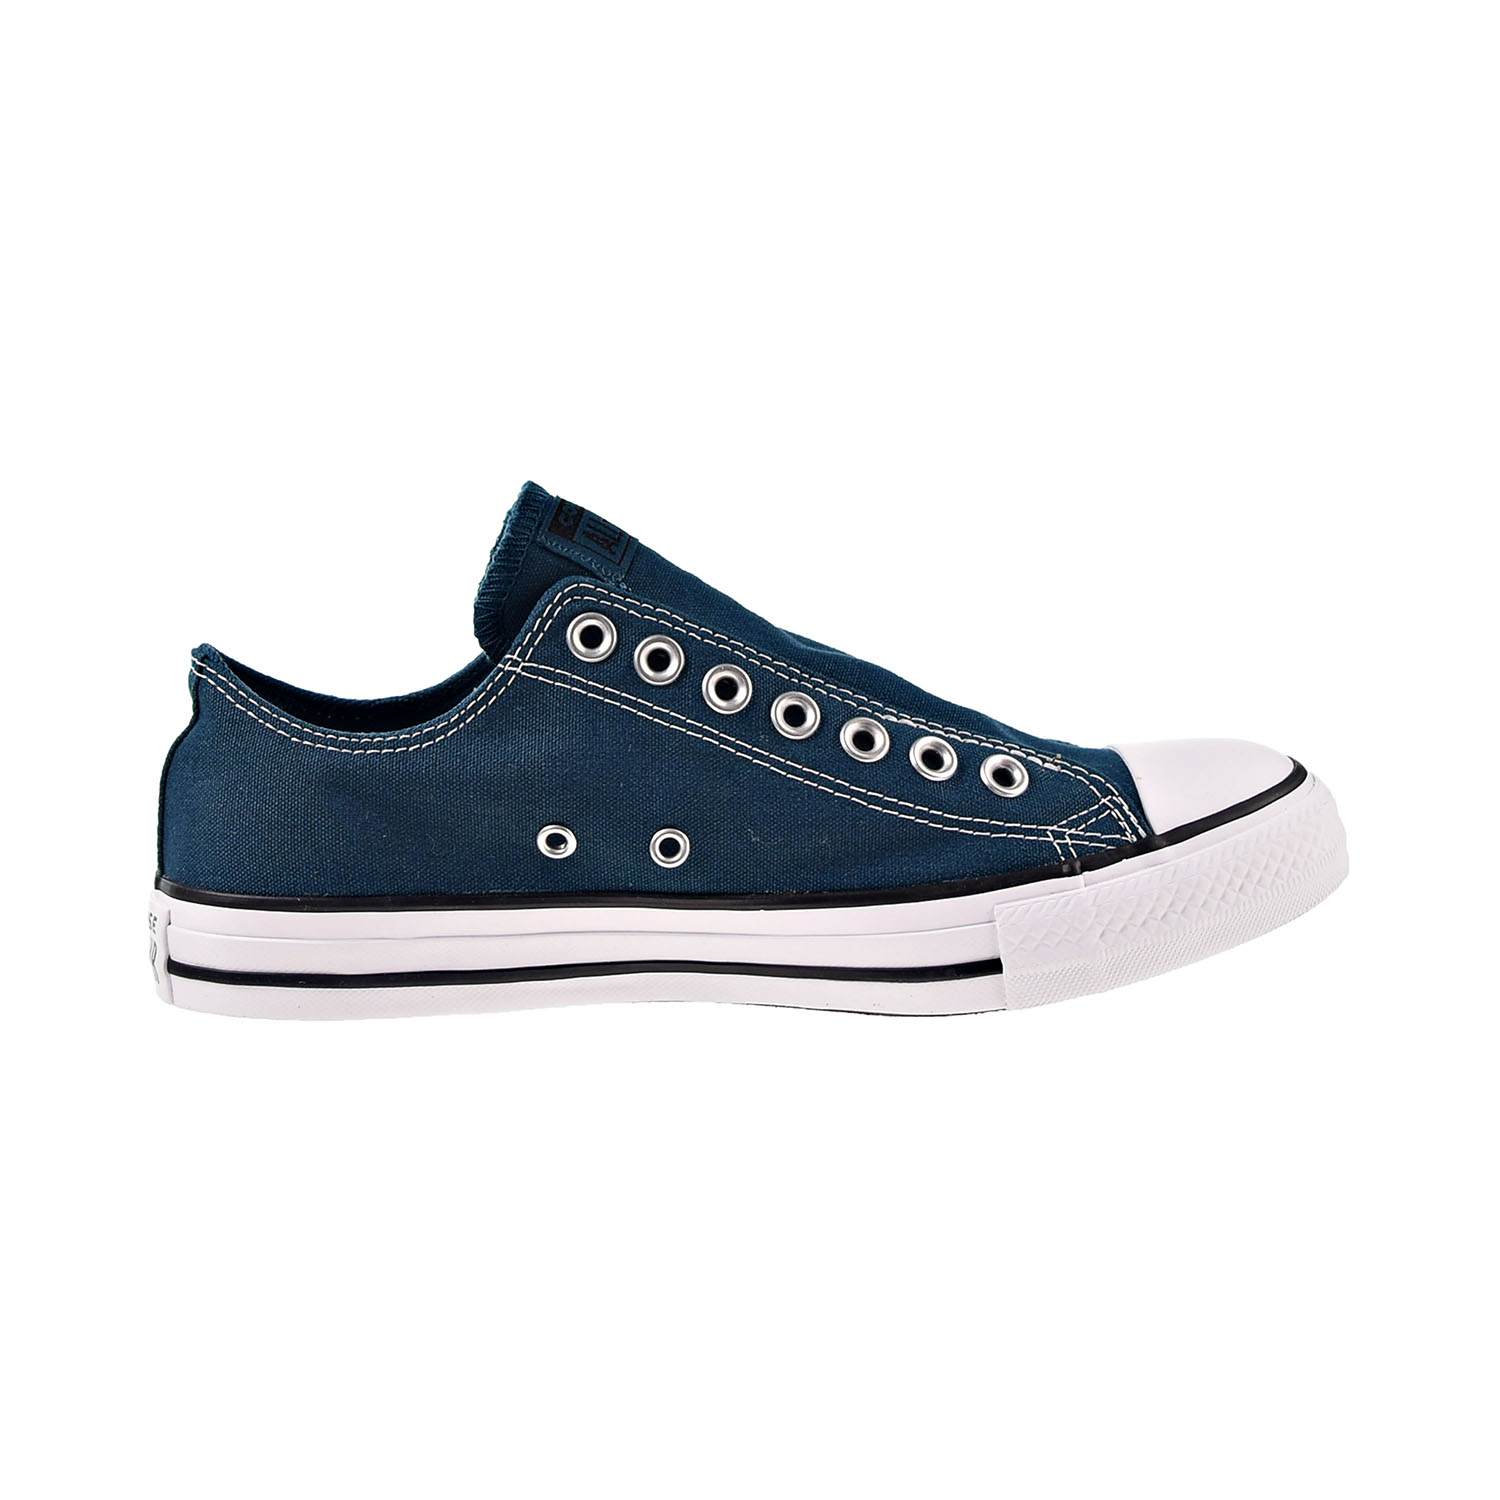 Converse Chuck Taylor All Star Slip Men's Shoes Midnight Turq-Black-White 166146f - image 1 of 6